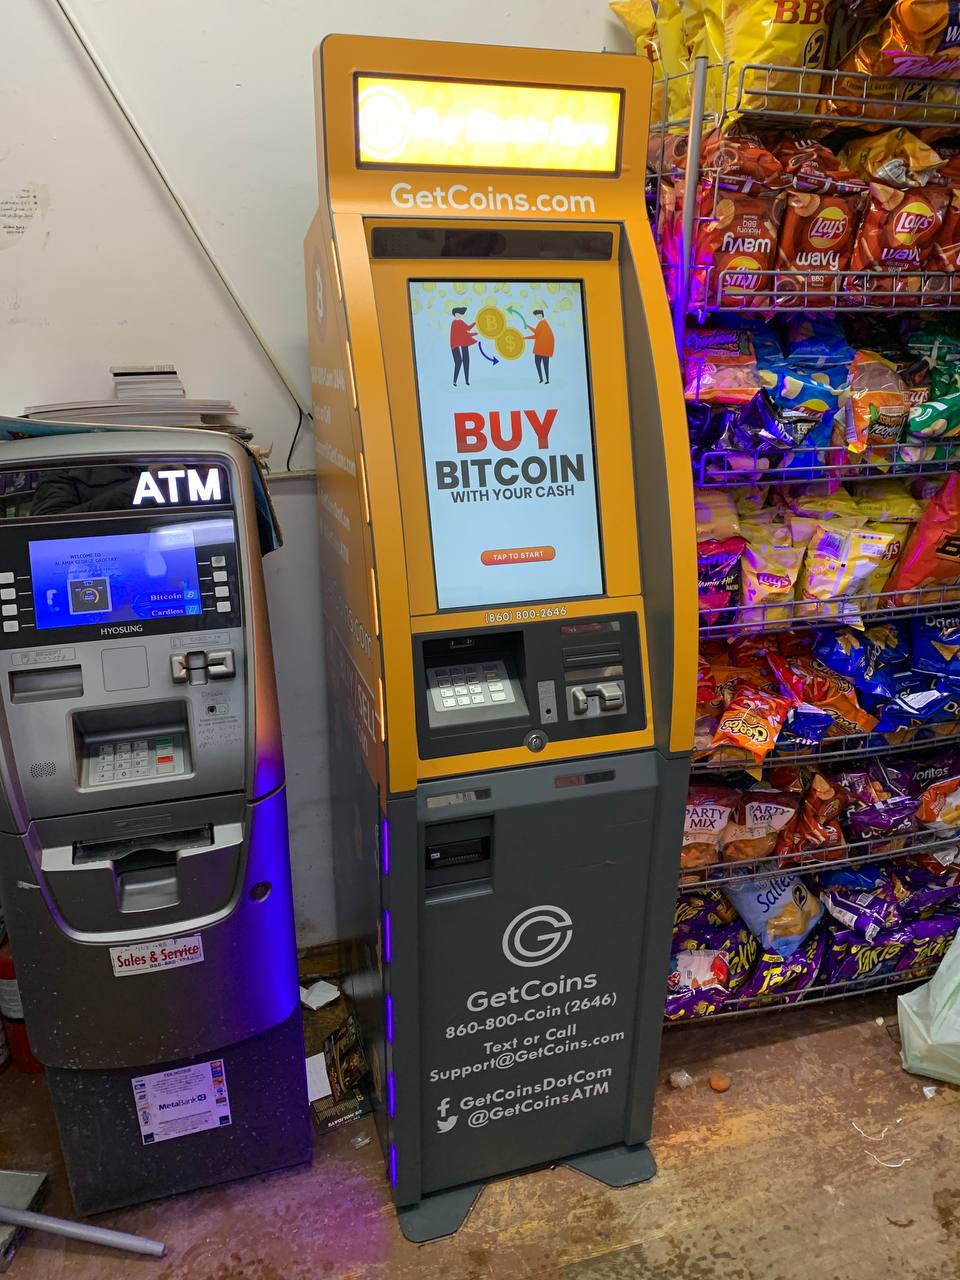 Getcoins - Bitcoin ATM - Inside of Al Amir George Grocery in Jersey City, New Jersey